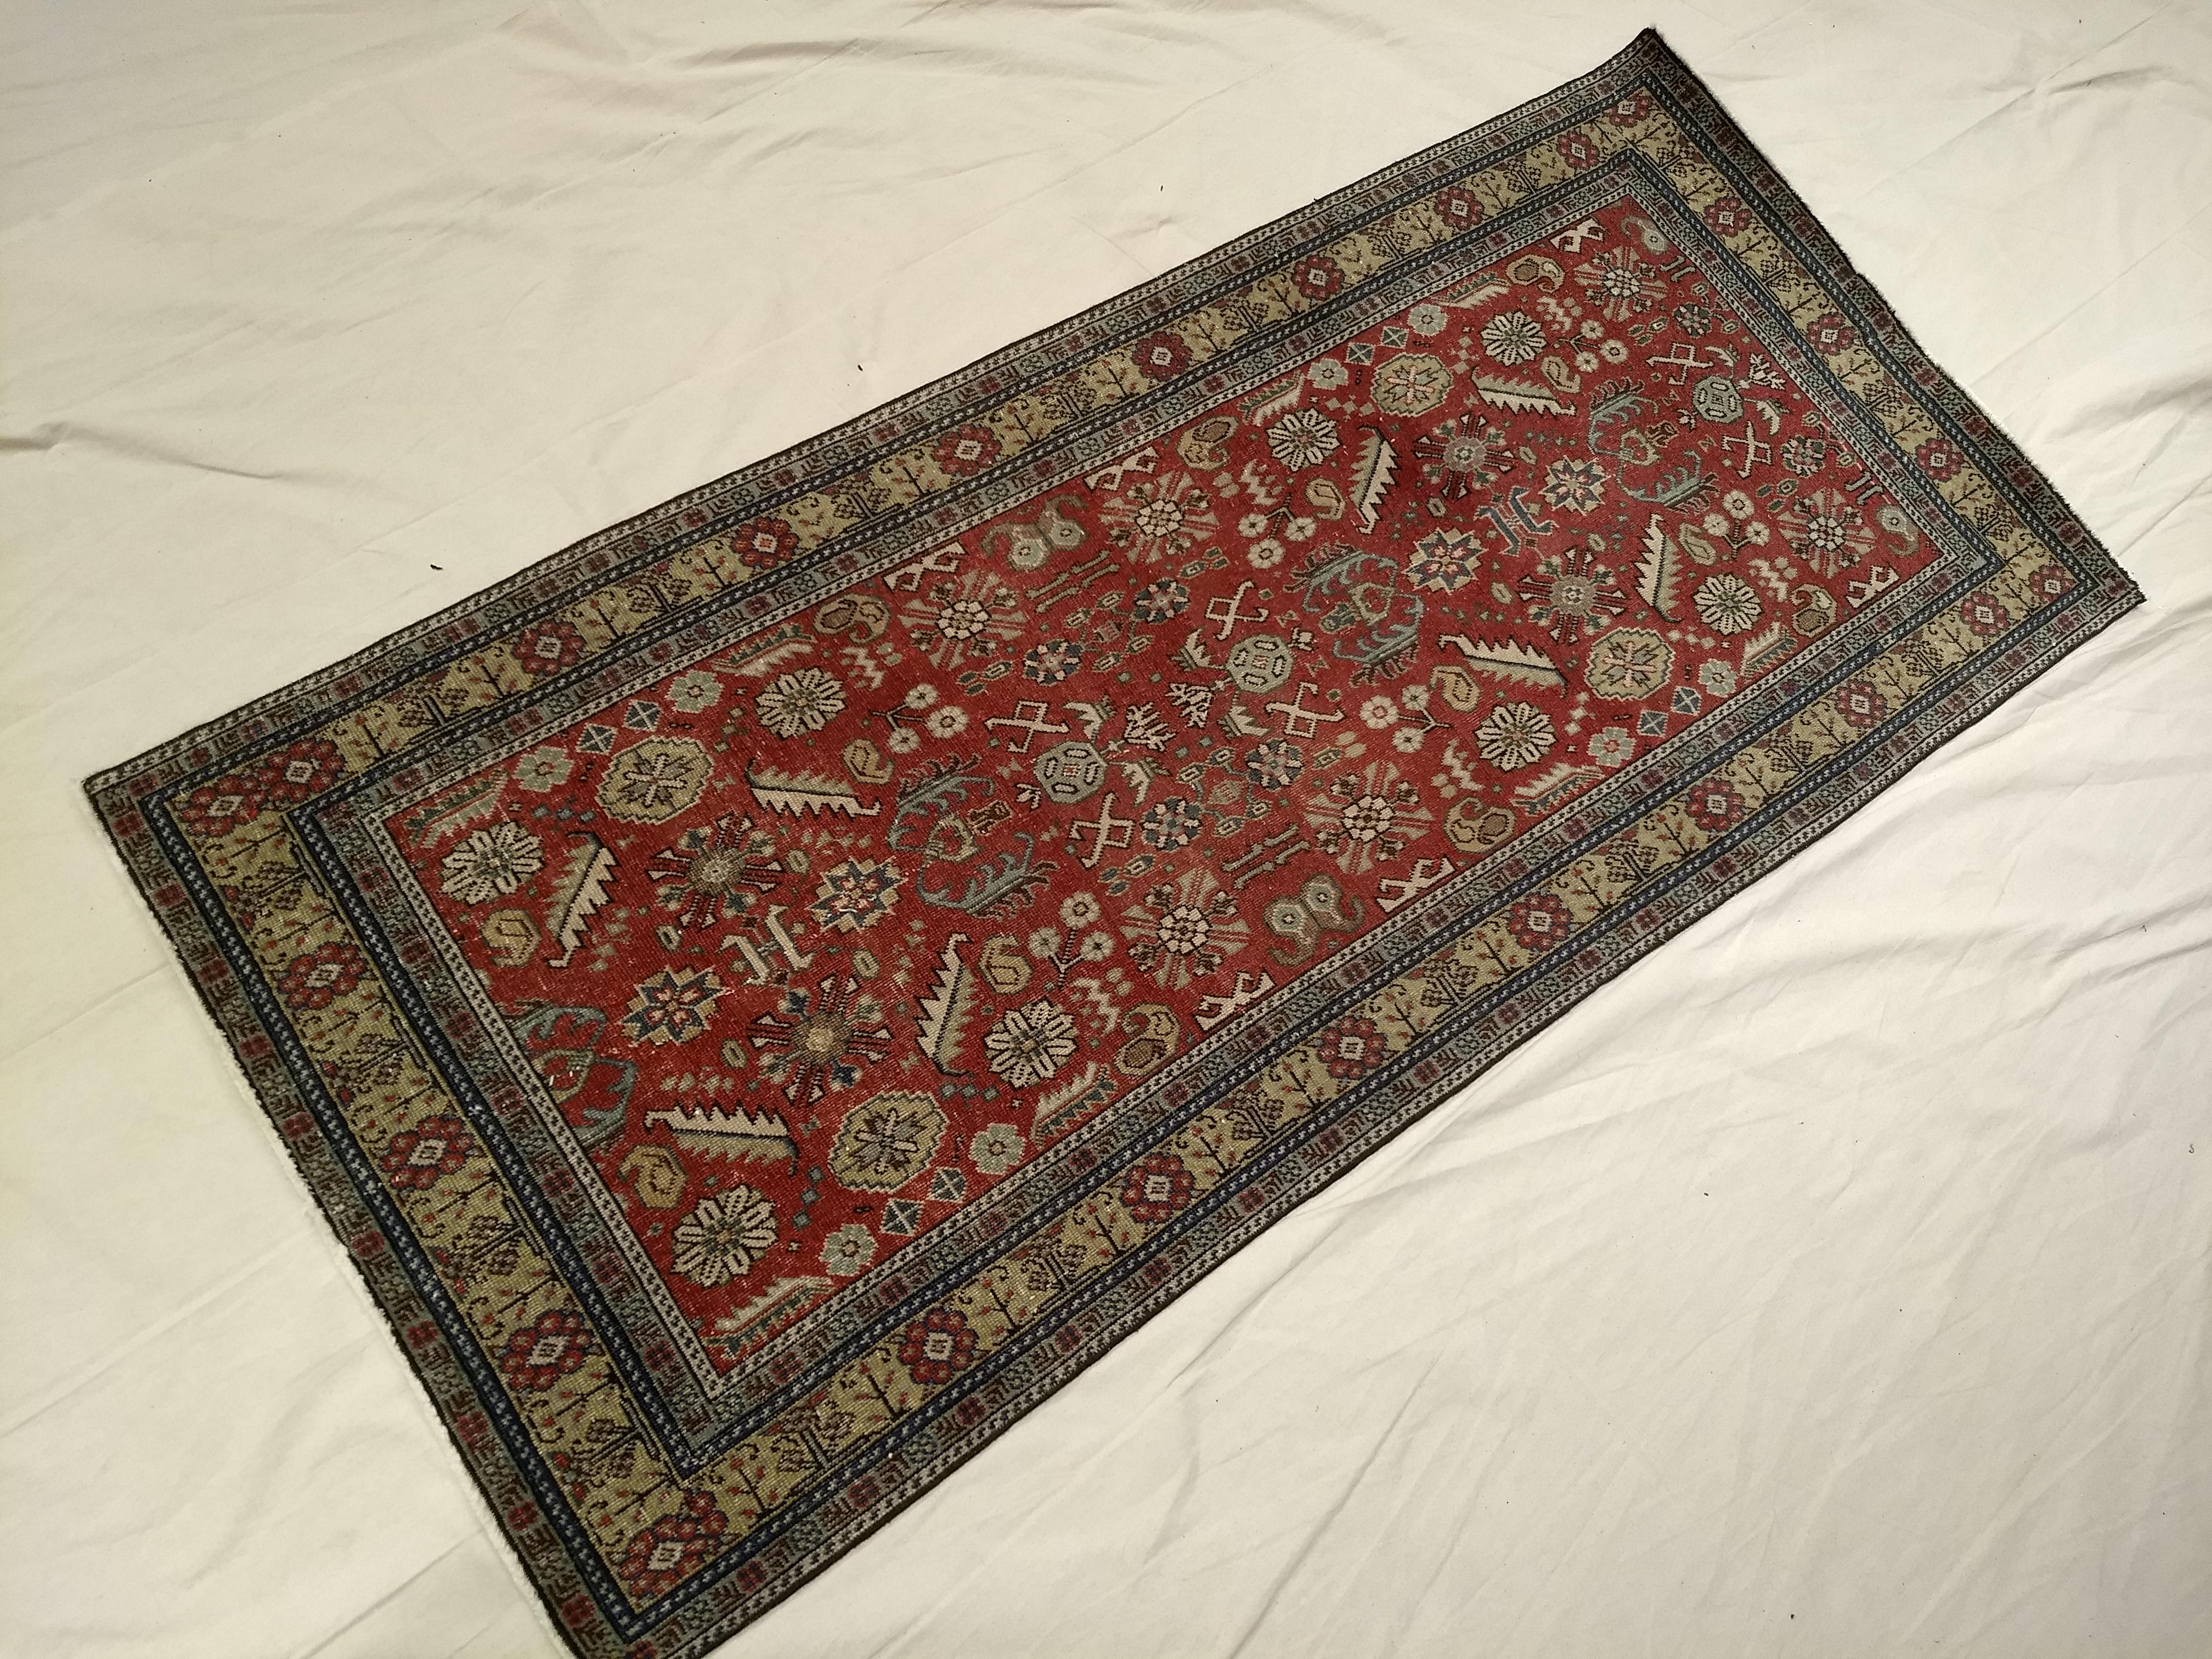 Vintage Khotan Area Rug in Allover Geometric Pattern on Brick Red, Yellow, Ivory For Sale 7